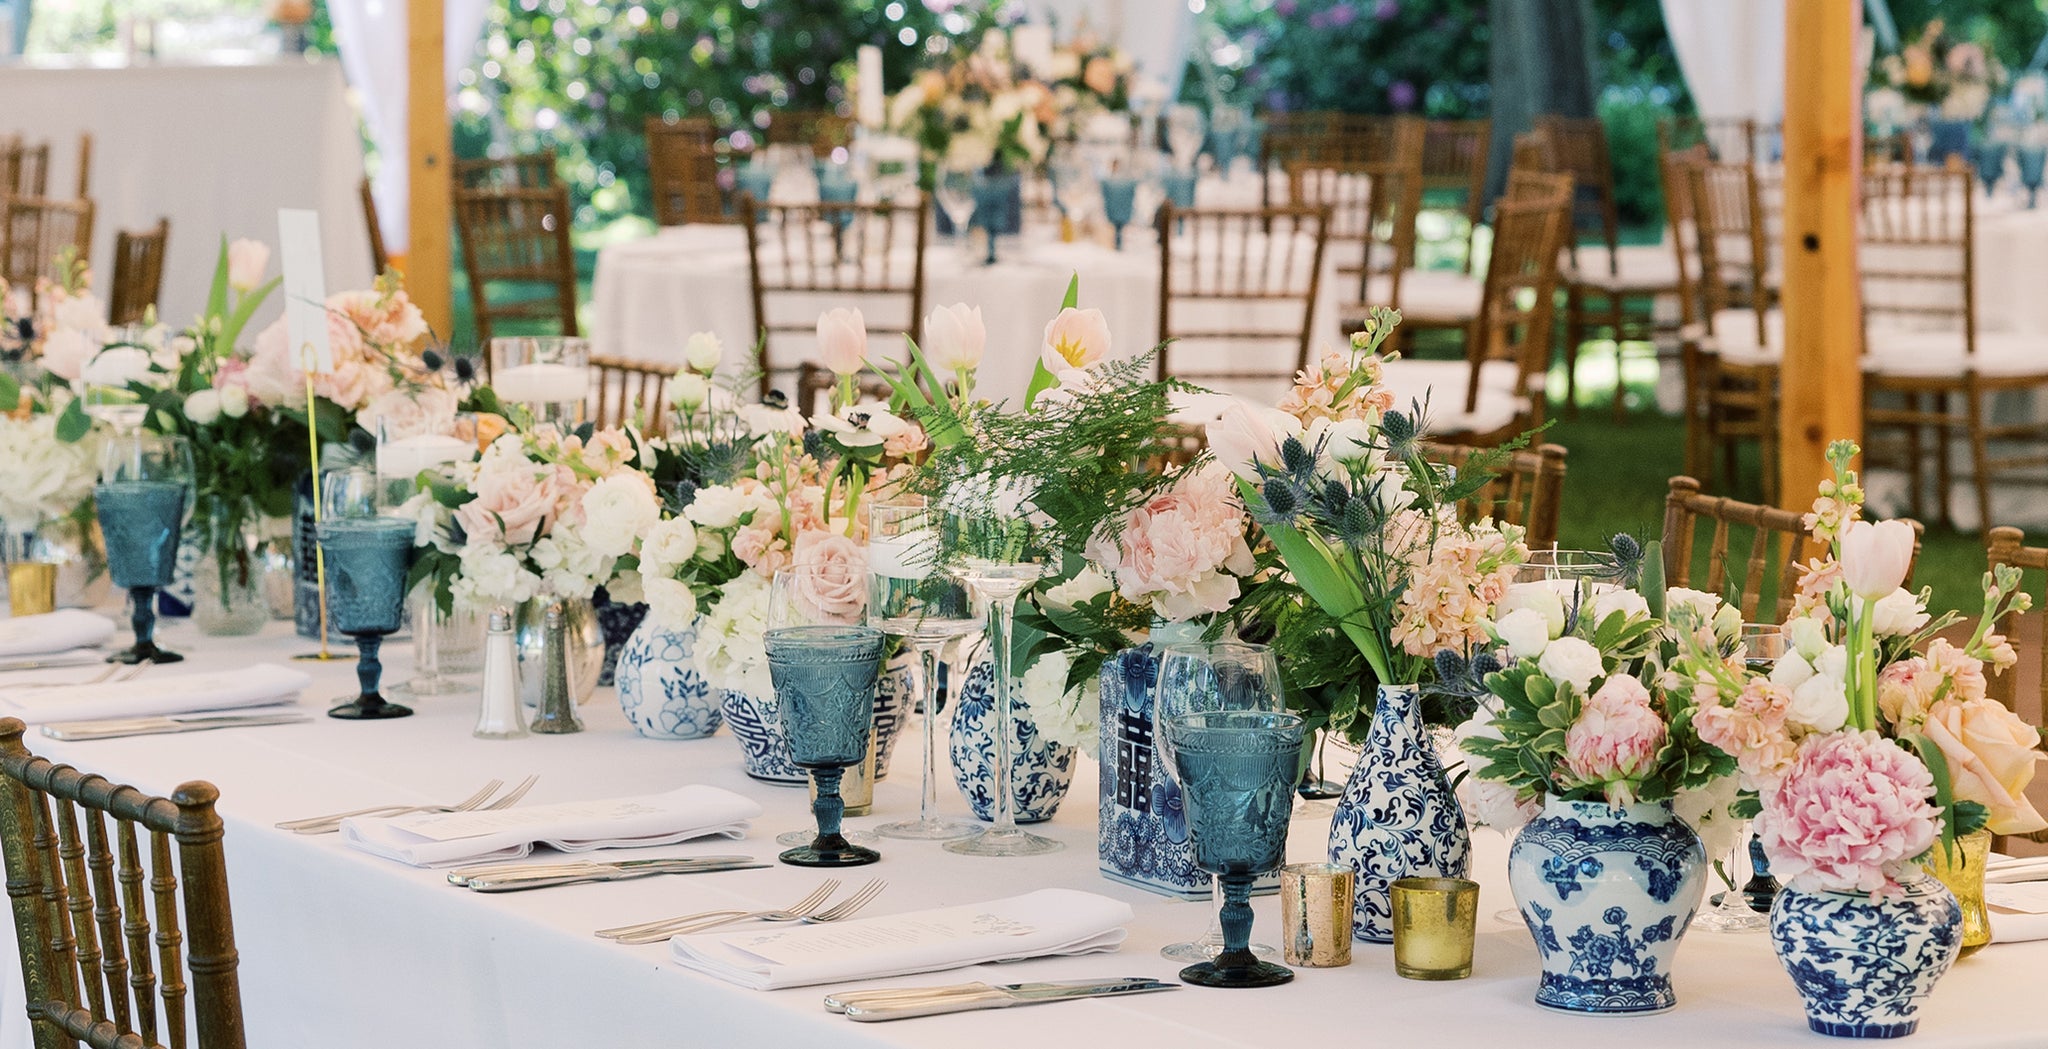 Suzie & Hunter's wedding tablescapes with clusters of blue and white ginger jars filled with pale pink peonies